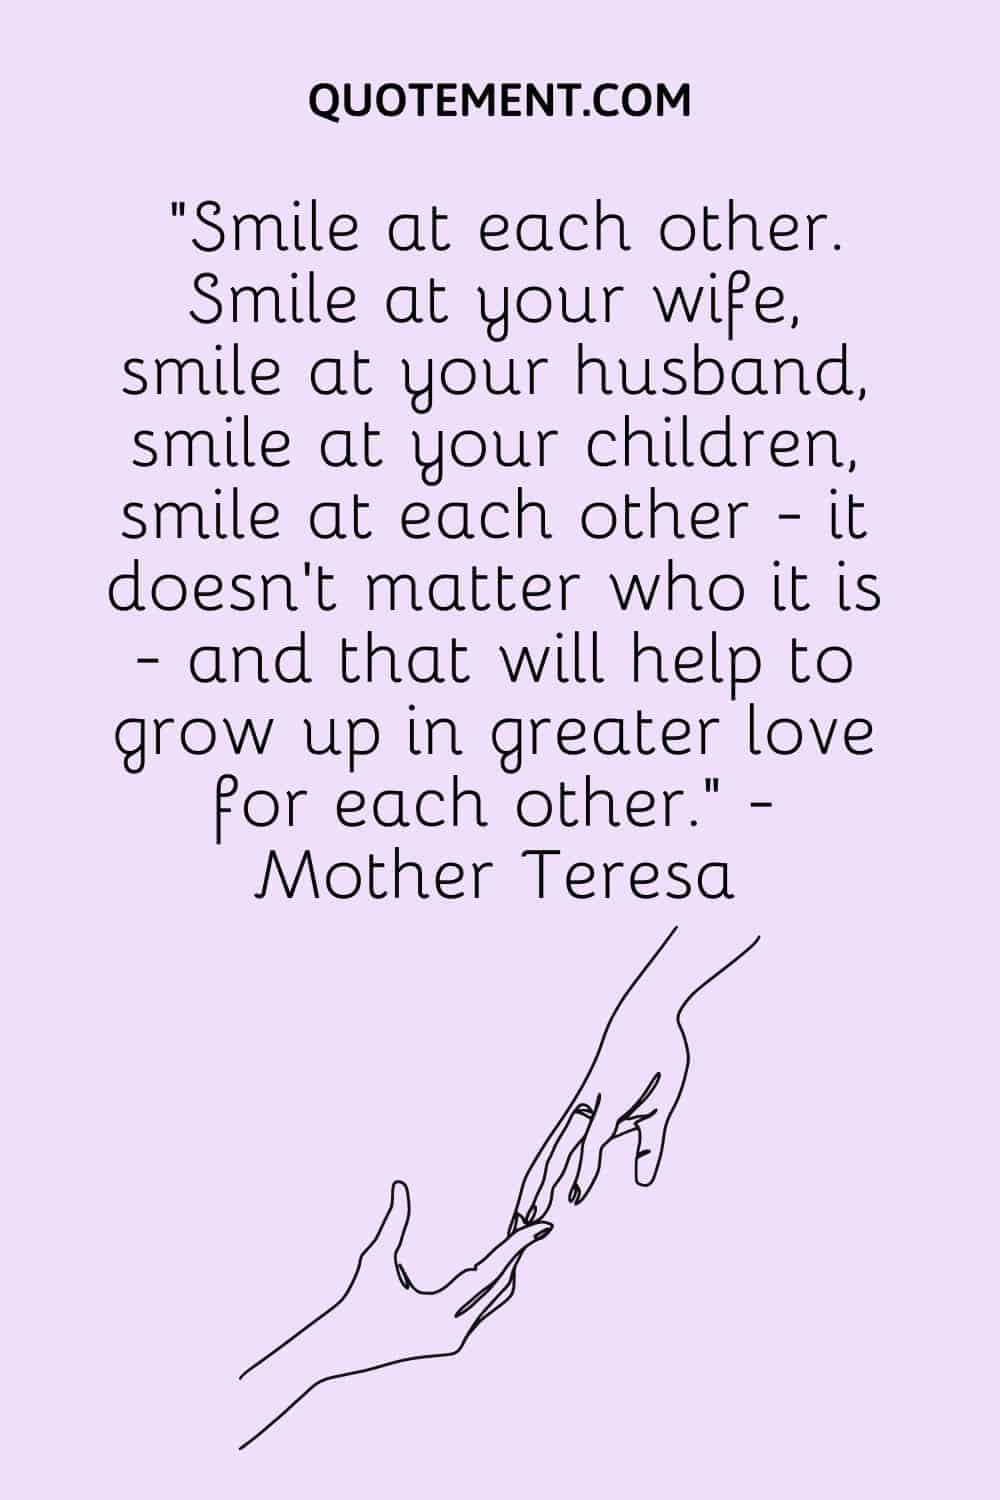 Smile at each other. Smile at your wife, smile at your husband, smile at your children